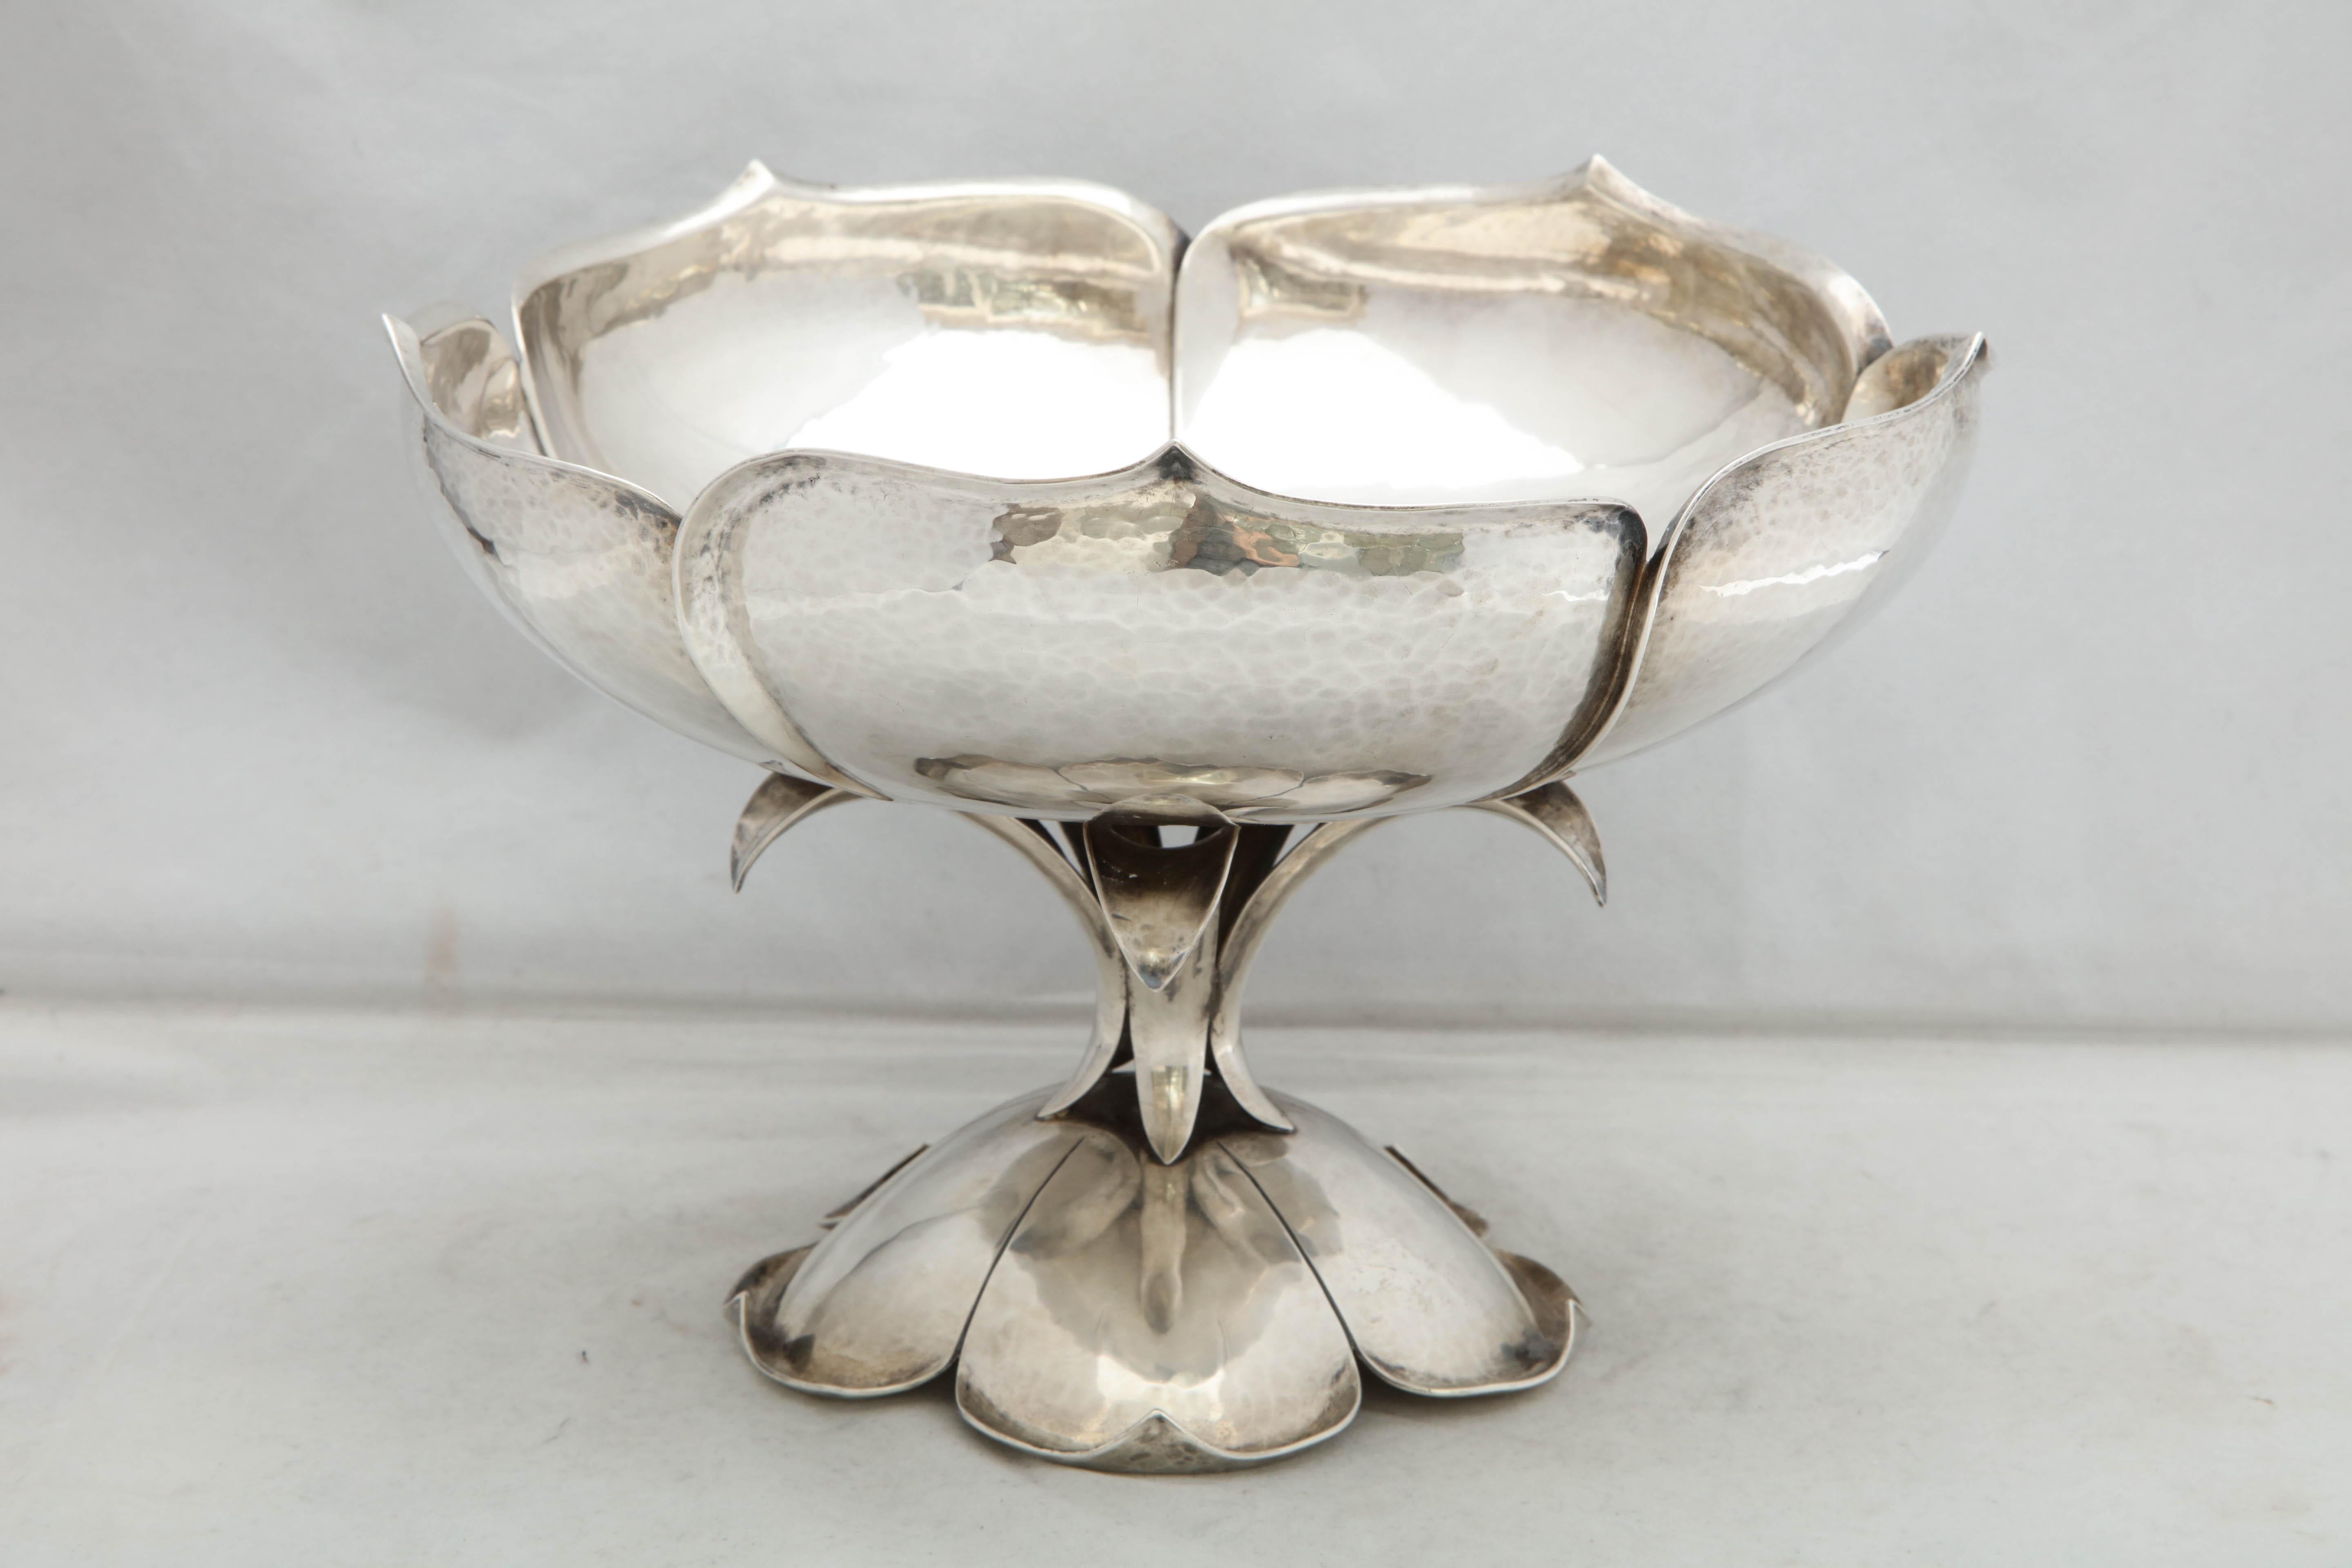 Arts & Crafts, graceful, sterling silver, lotus - form centerpiece bowl by Cellini (The Cellini Shop), Evanston, Illinois, circa 1930. Lightly hammered design. Measures 7 3/4 inches high x 9 5/8 diameter. Weighs 39.130 troy ounces. Excellent